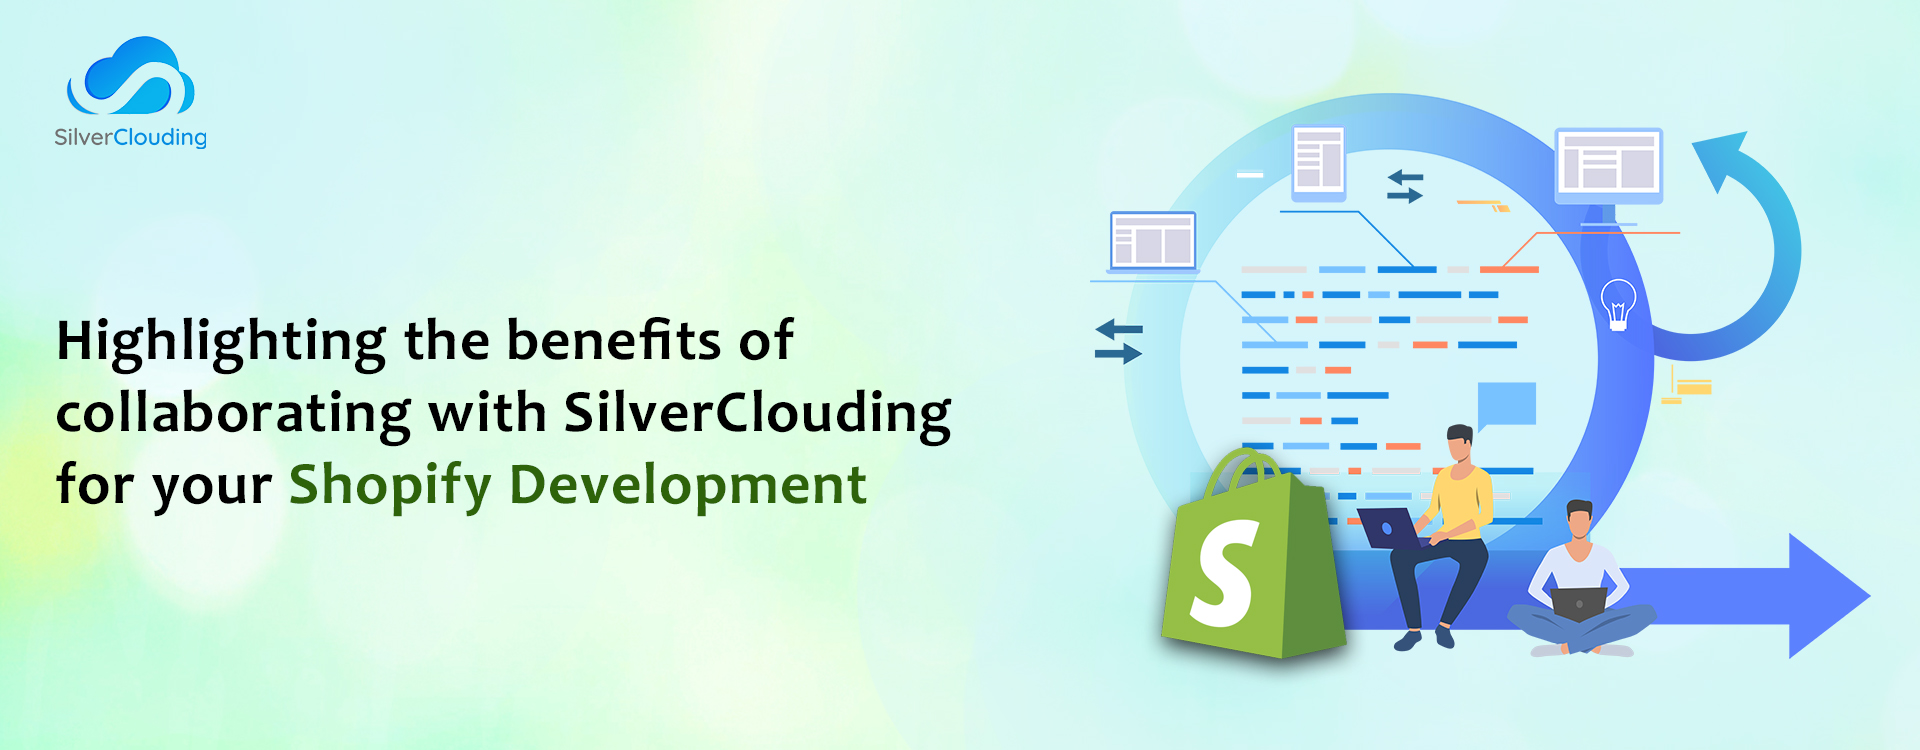 Highlighting the benefits of collaborating with SilverClouding for your Shopify Development